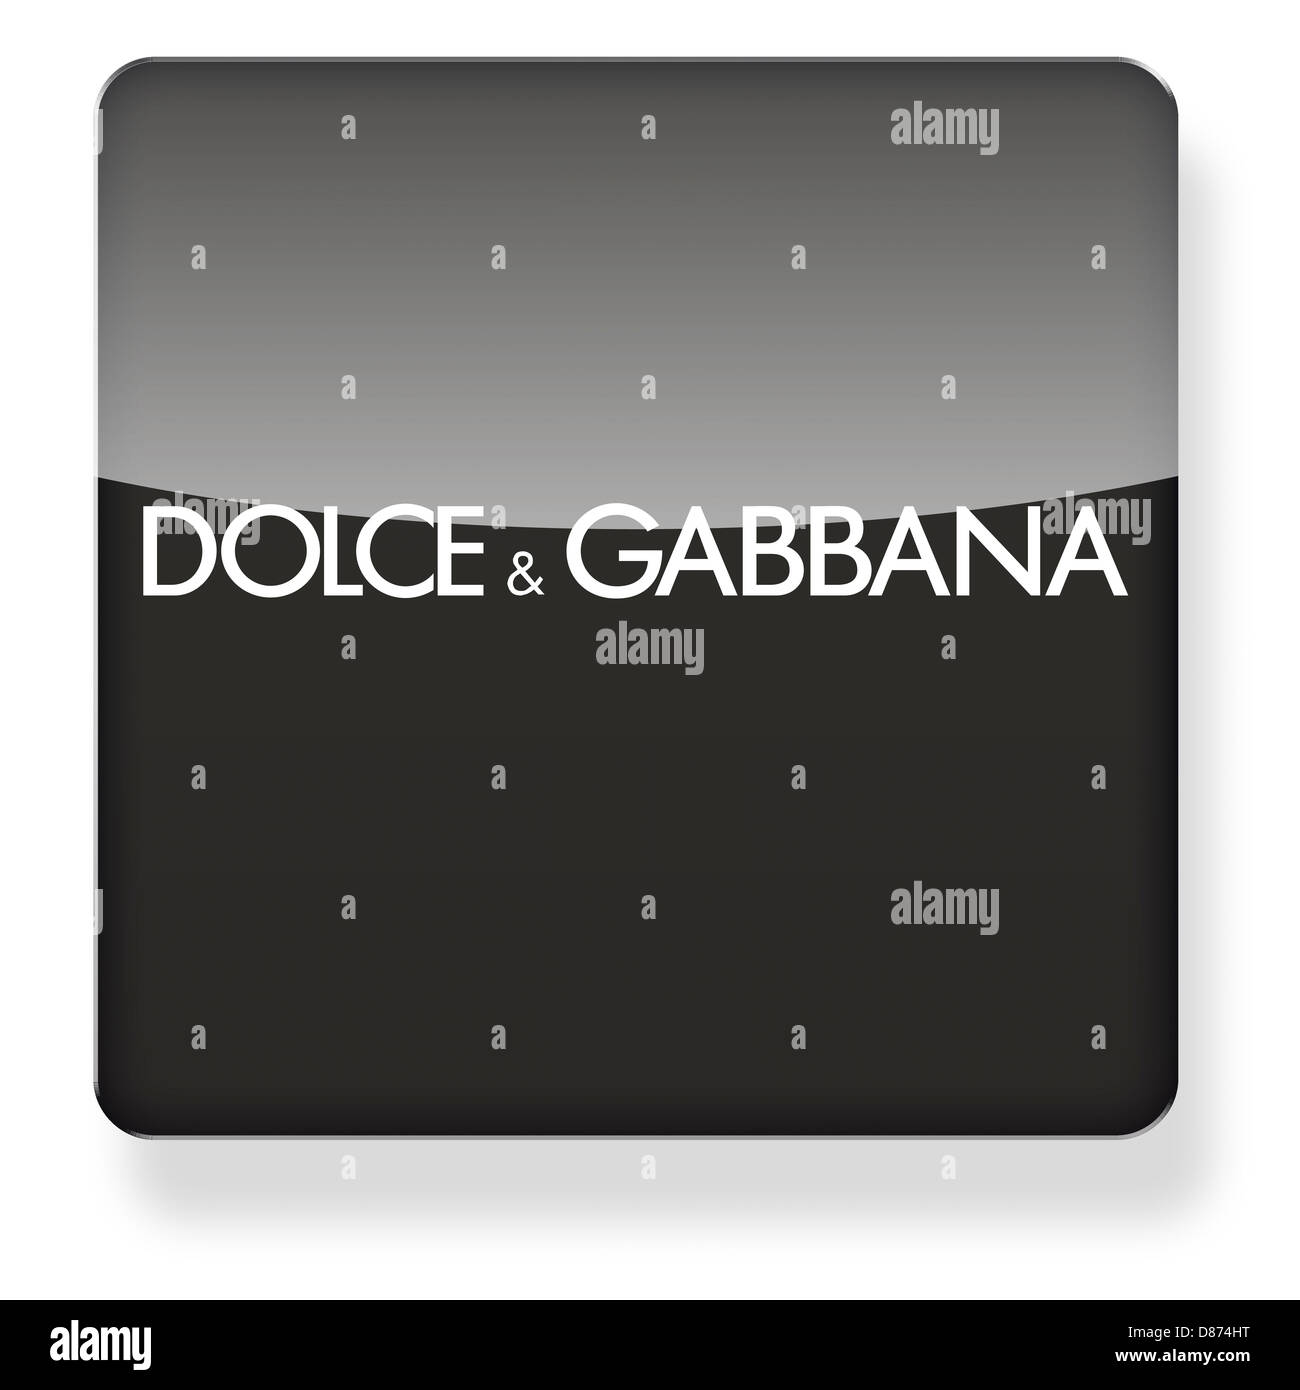 Dolce gabbana logo Cut Out Stock Images & Pictures - Alamy